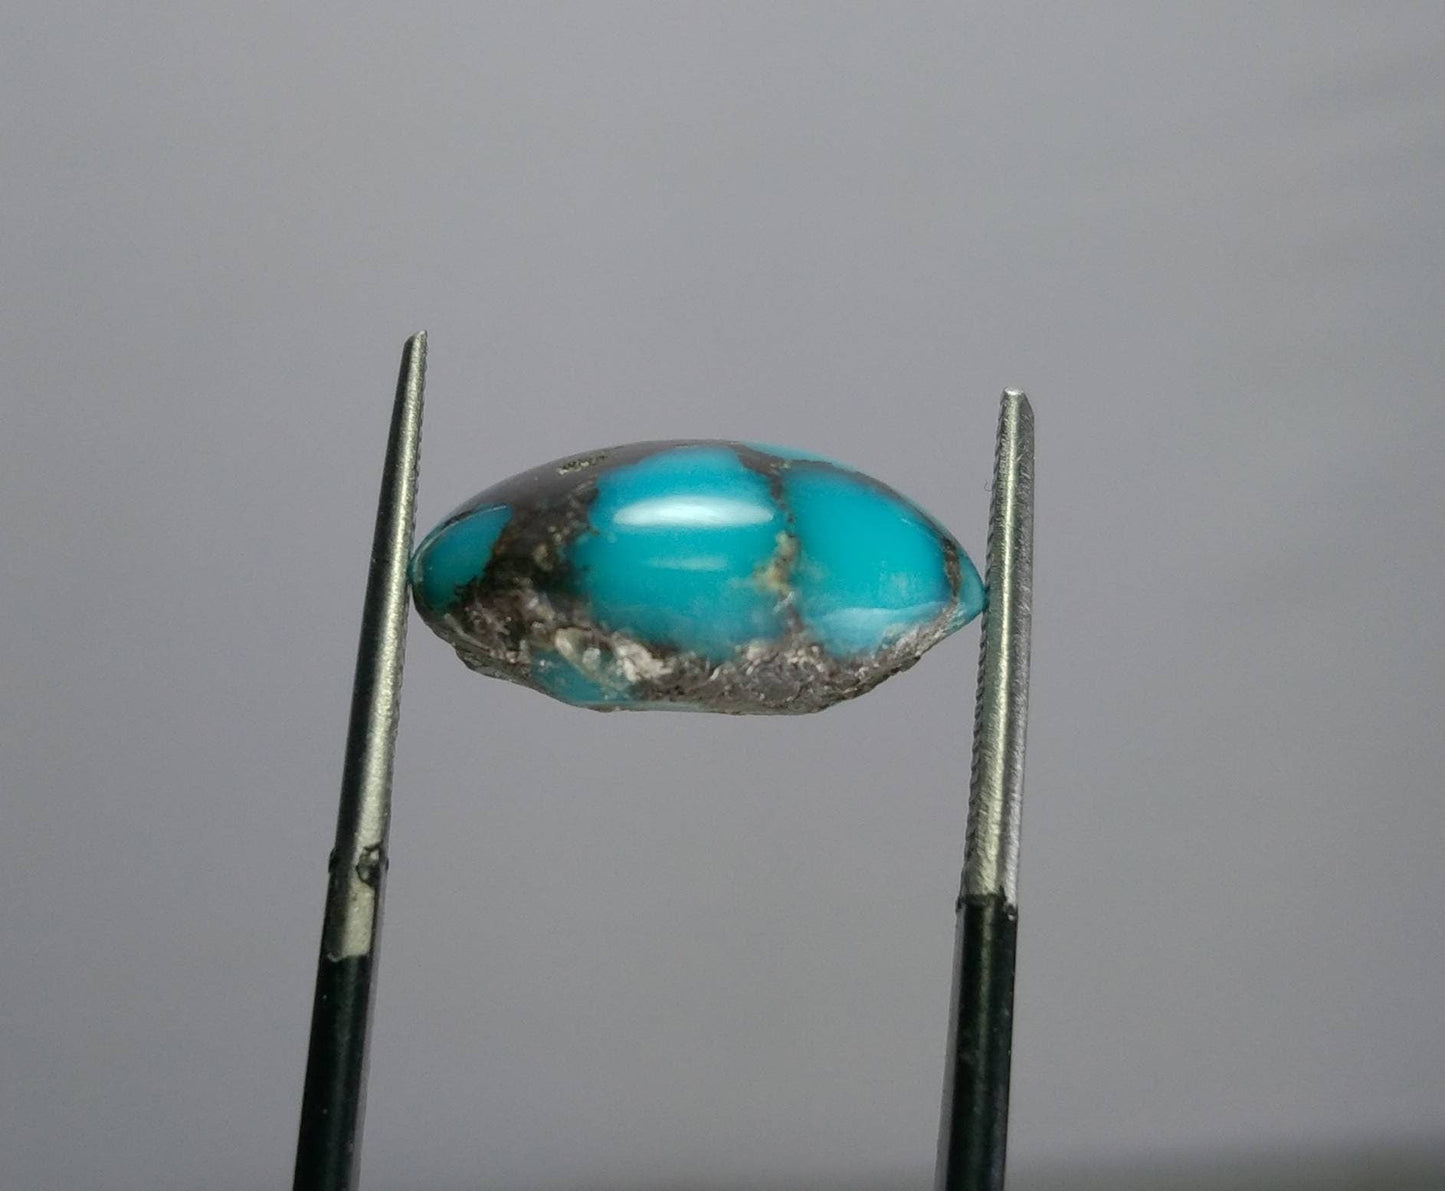 ARSAA GEMS AND MINERALSNatural fine quality beautiful 10 carats stabilized oval shape kingman web turquoise cabochon - Premium  from ARSAA GEMS AND MINERALS - Just $20.00! Shop now at ARSAA GEMS AND MINERALS